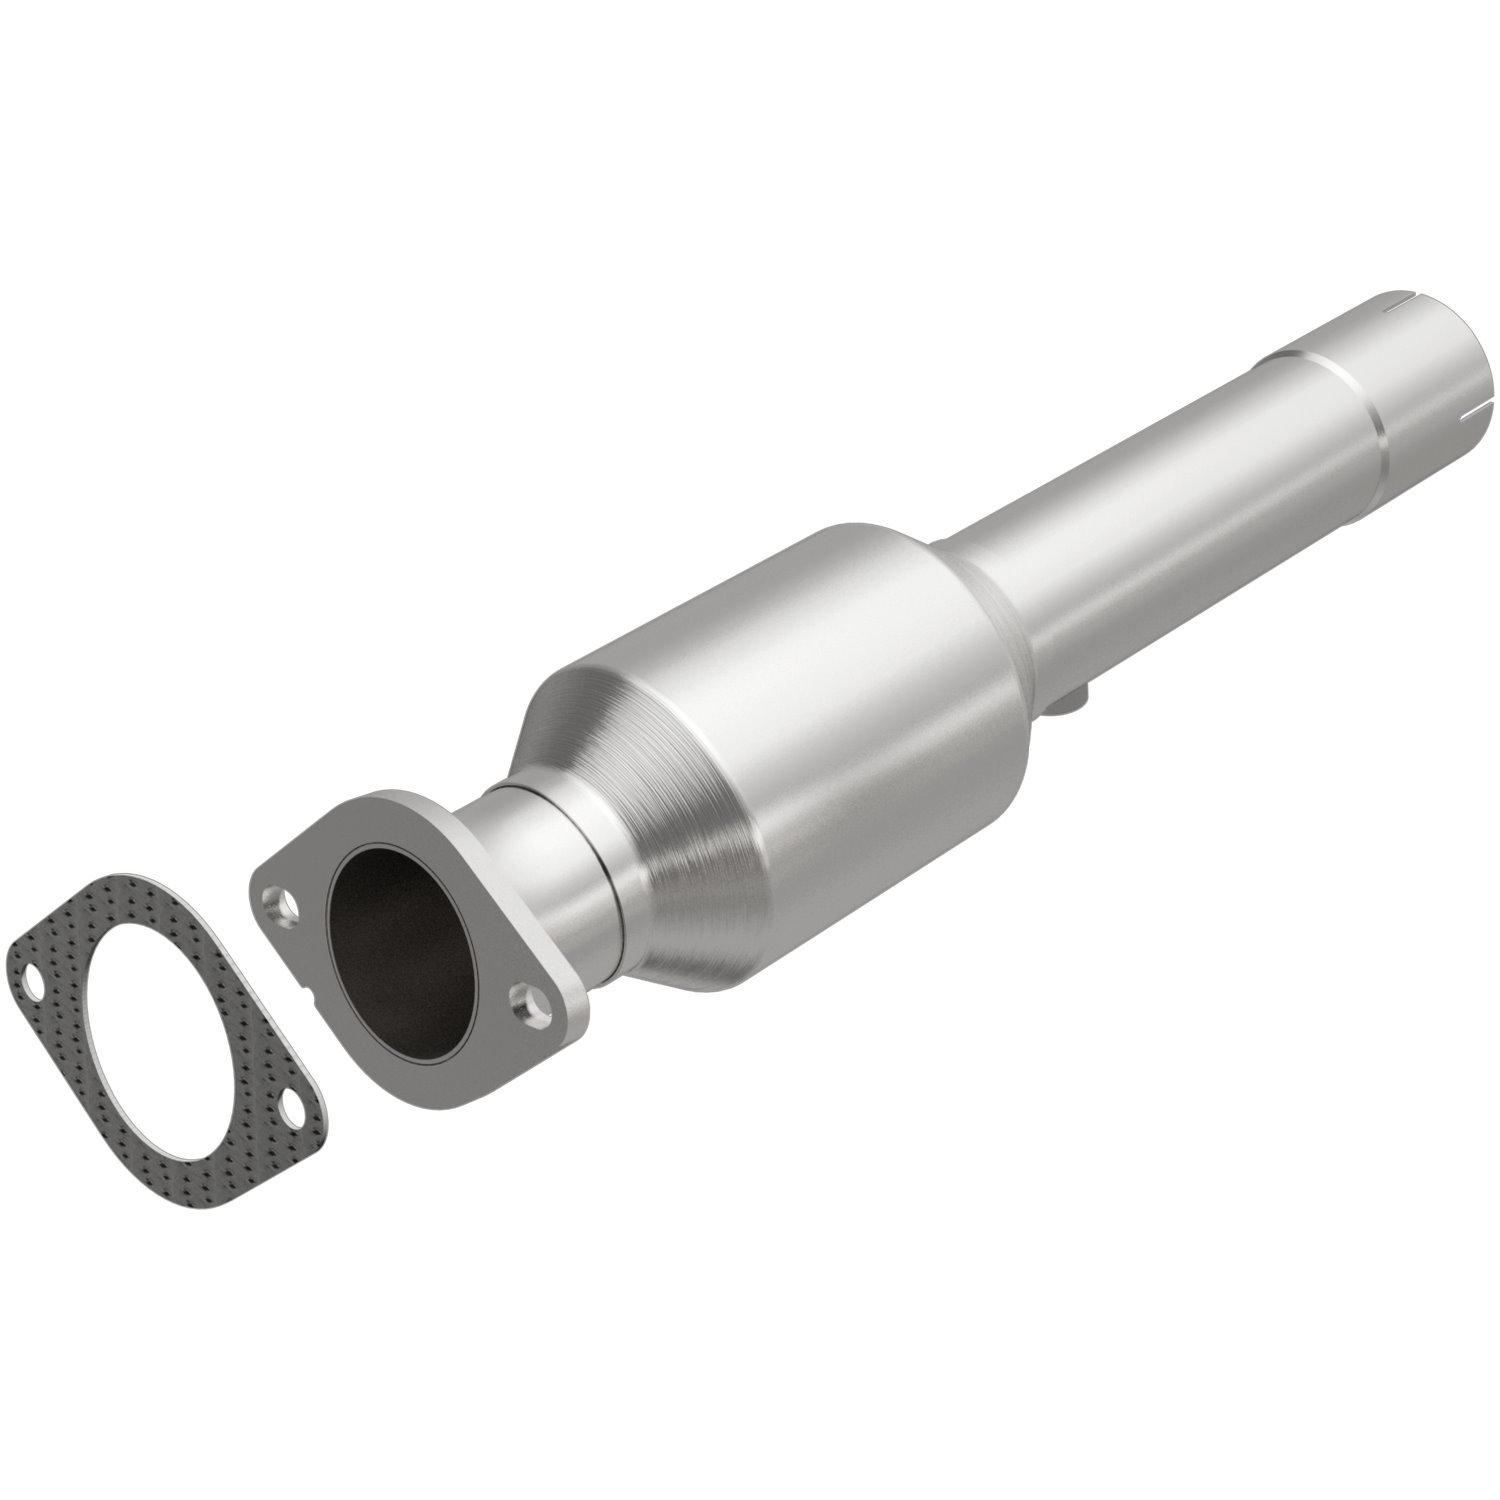 OEM Grade Federal / EPA Compliant Direct-Fit Catalytic Converter 21-989